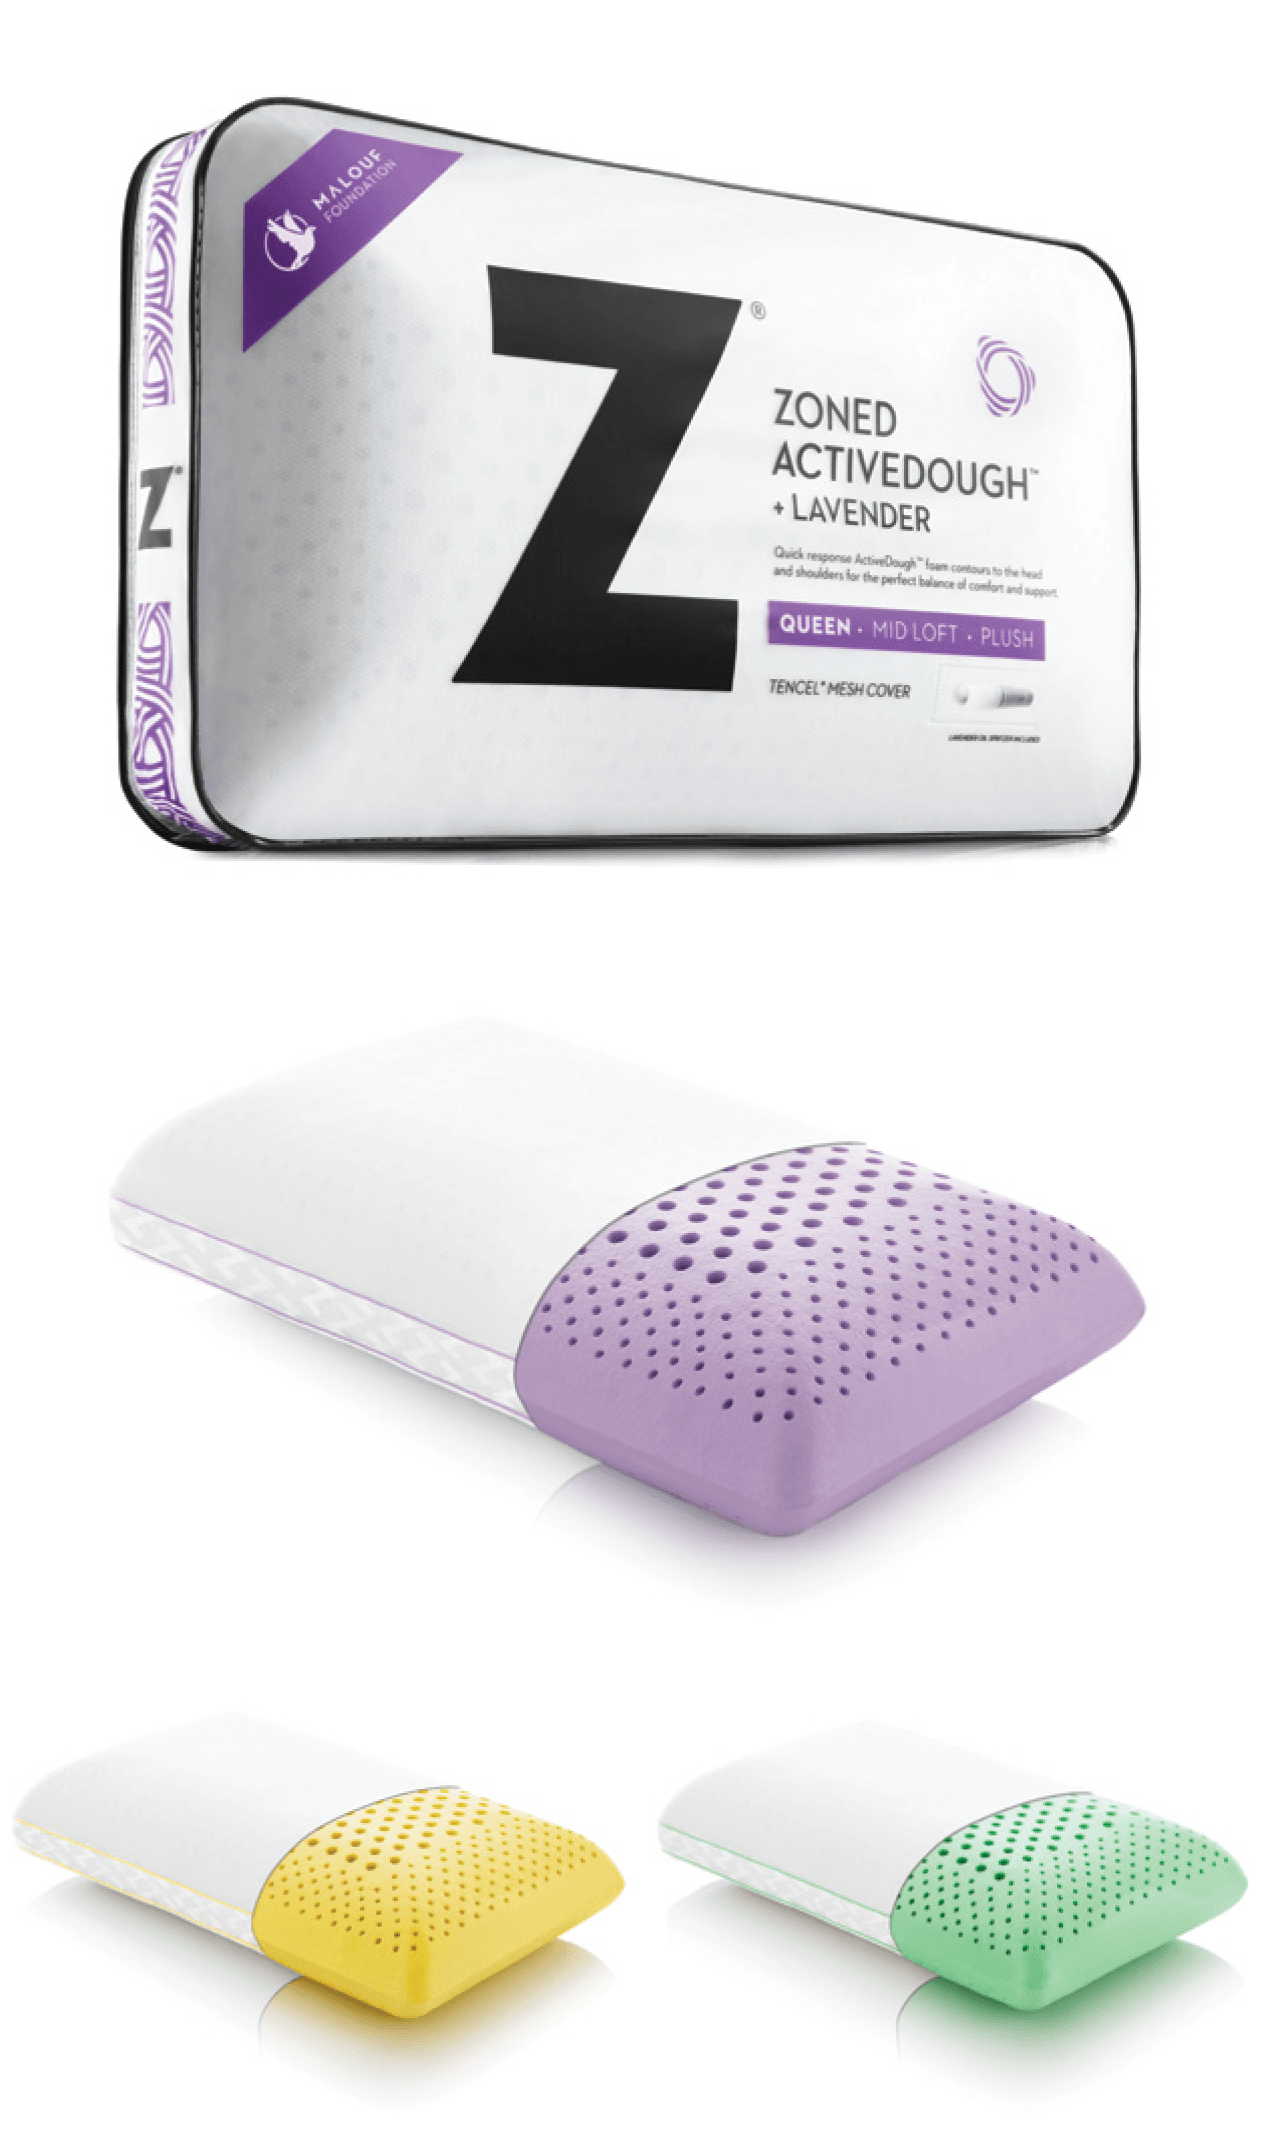 Zoned Activedough + Lavender Pillow